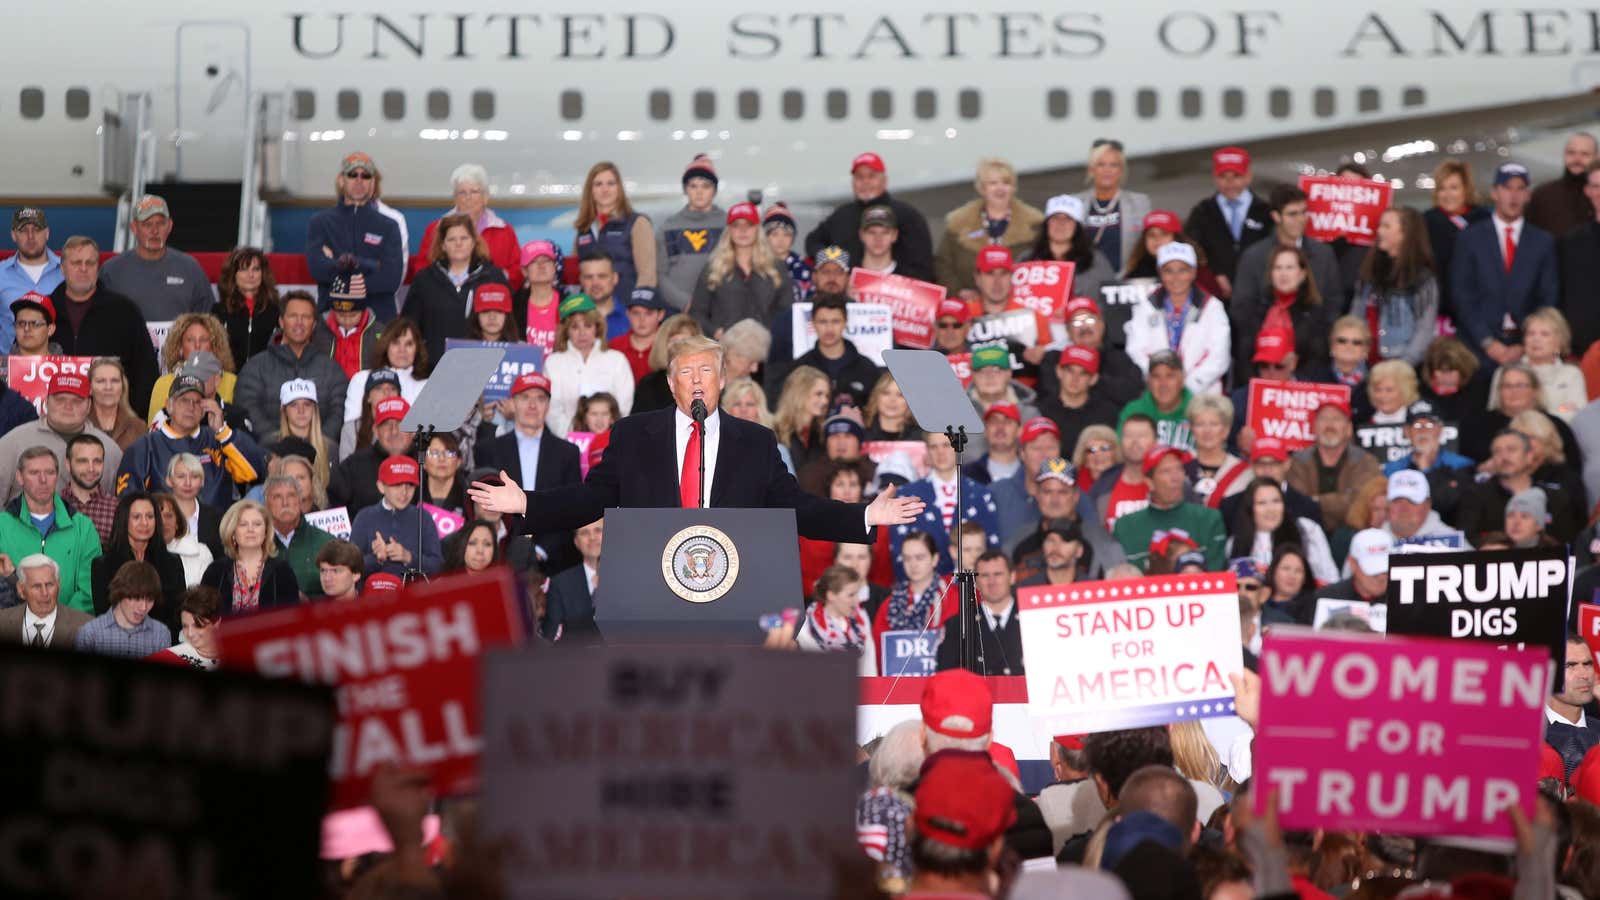 President Trump holds a campaign rally in Huntington, West Virginia, November 2, 2018.